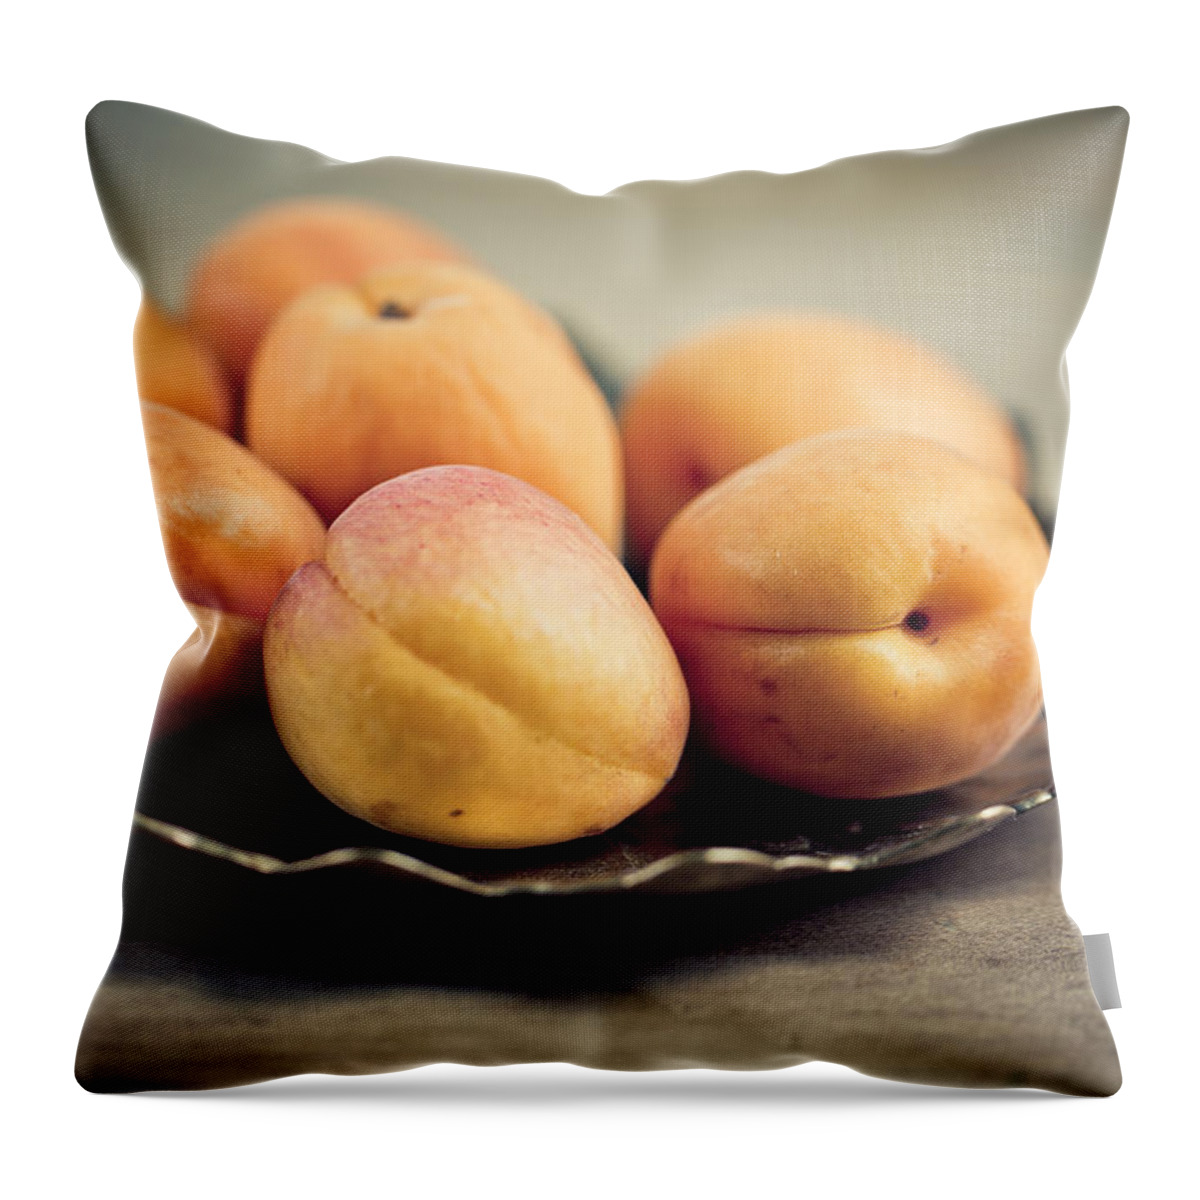 Apricot Throw Pillow featuring the photograph Apricots by Nailia Schwarz